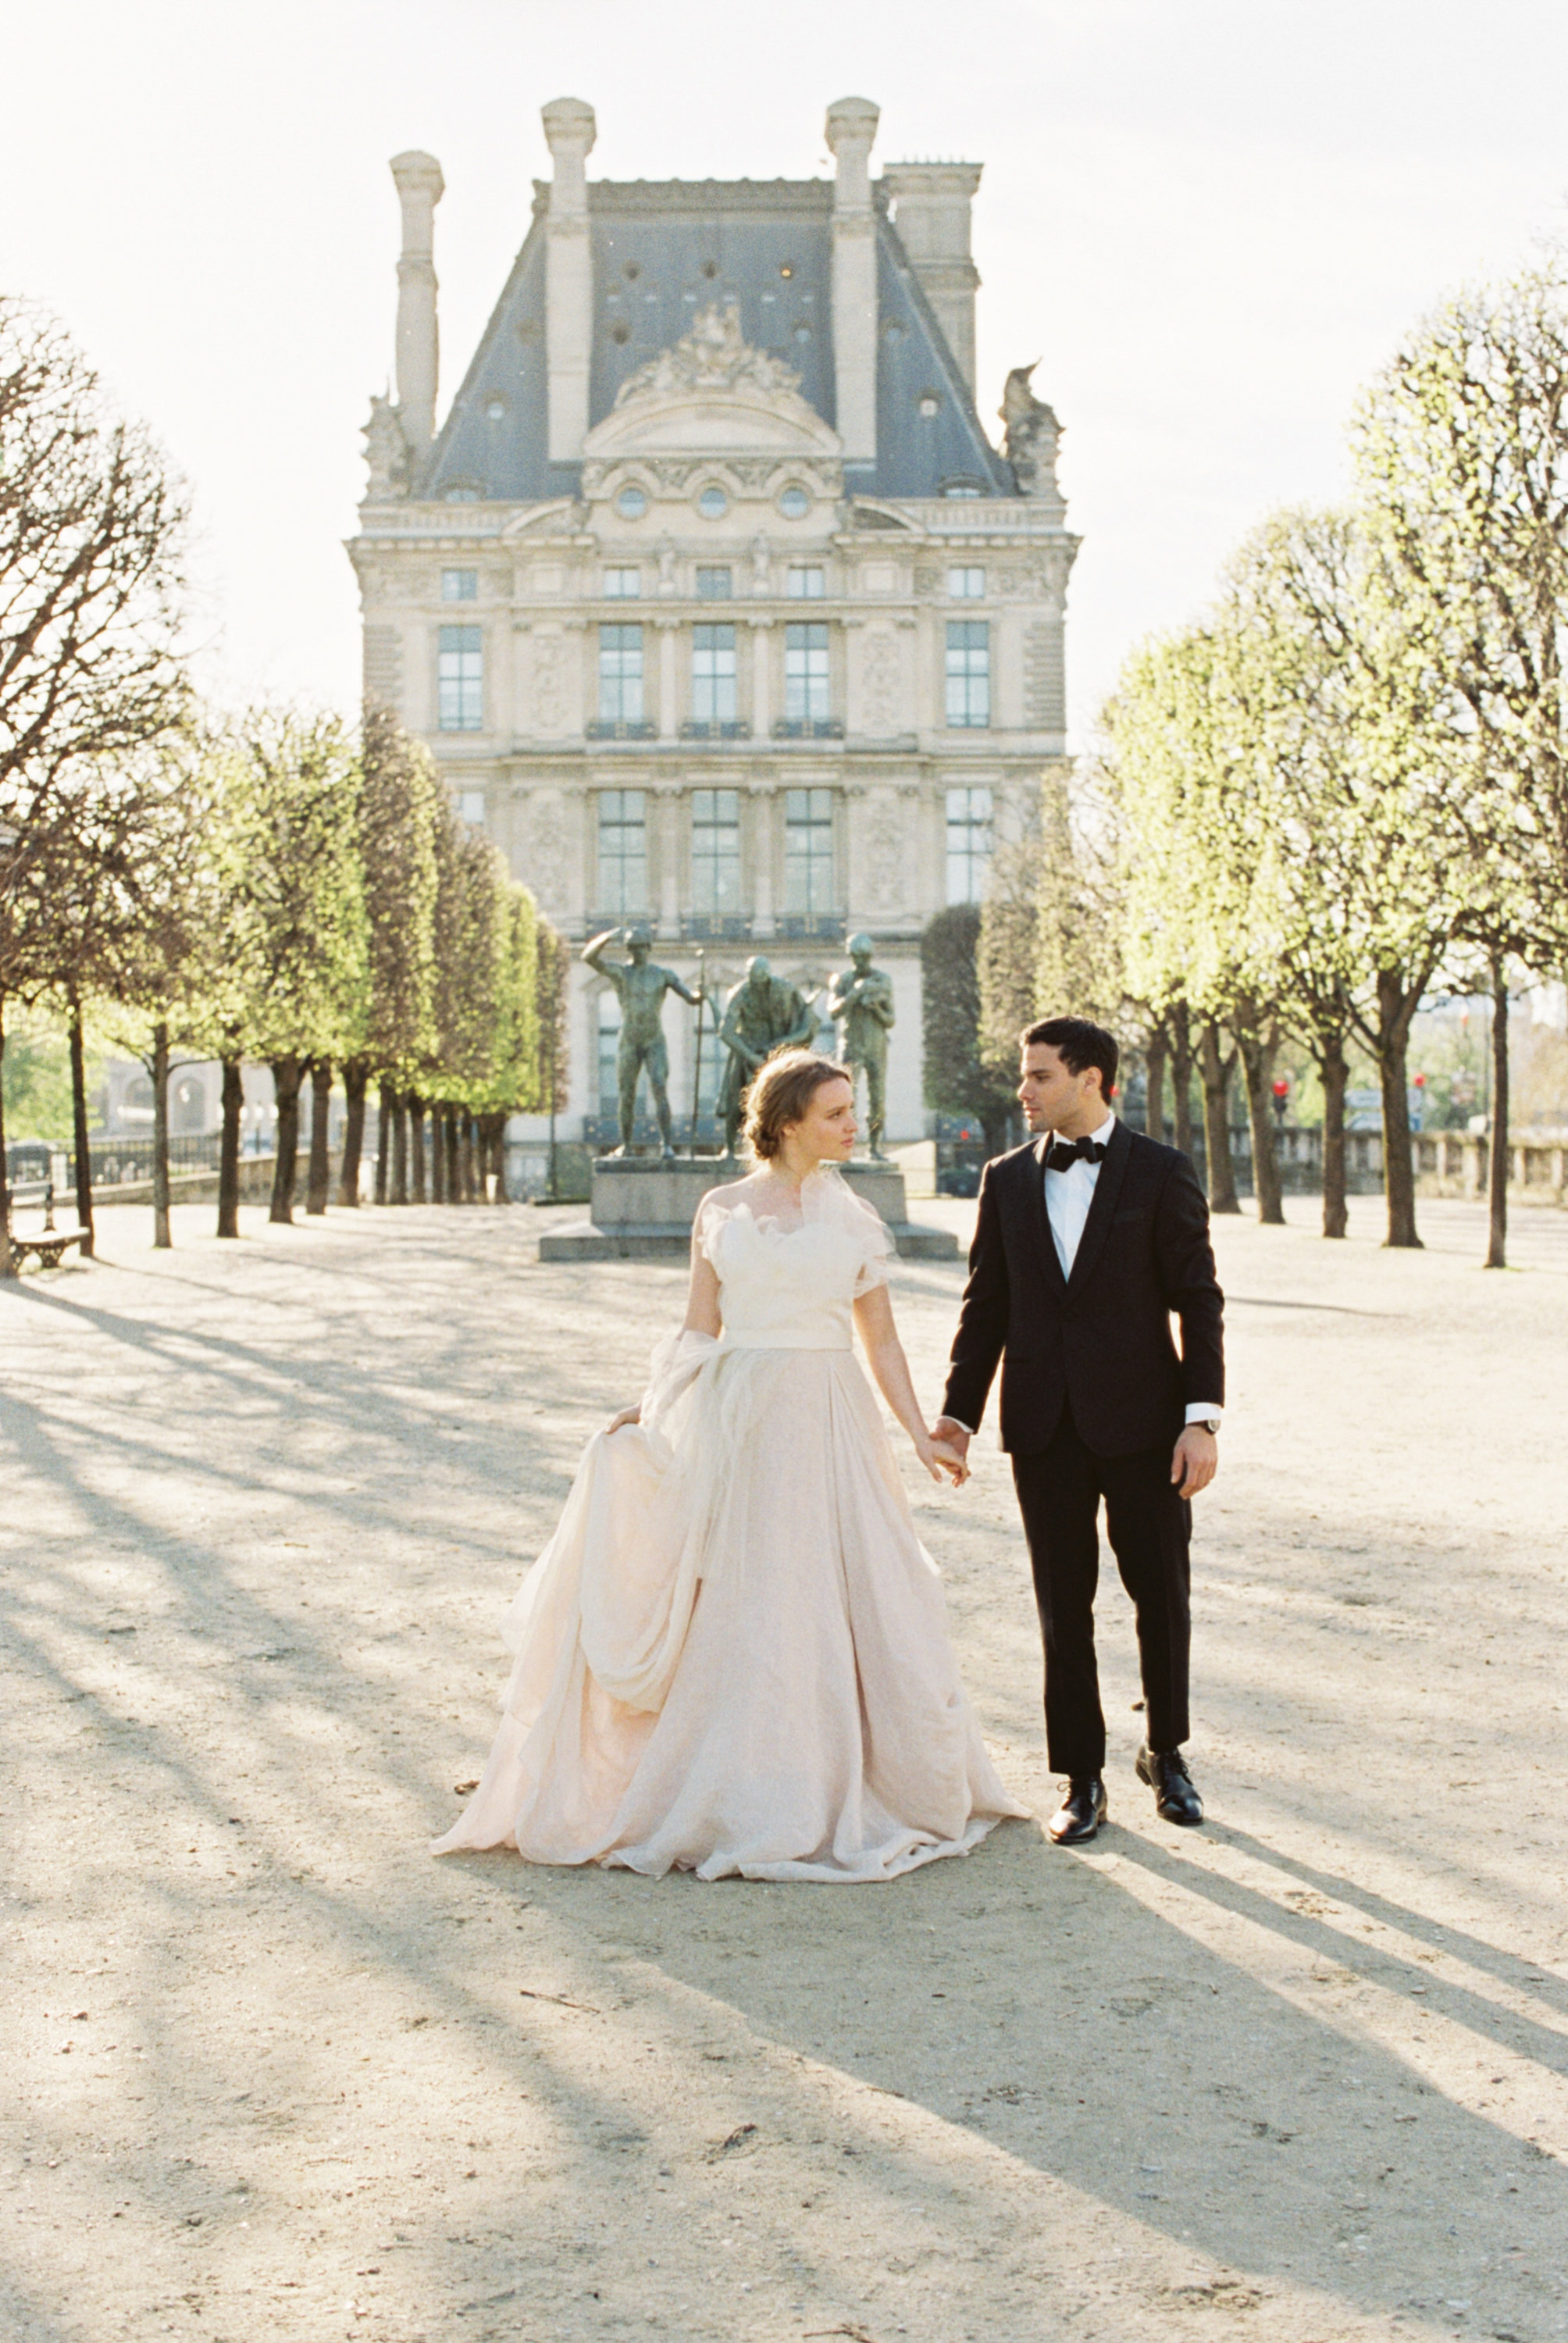 Grand palais wedding gown blush and tulle71.jpg